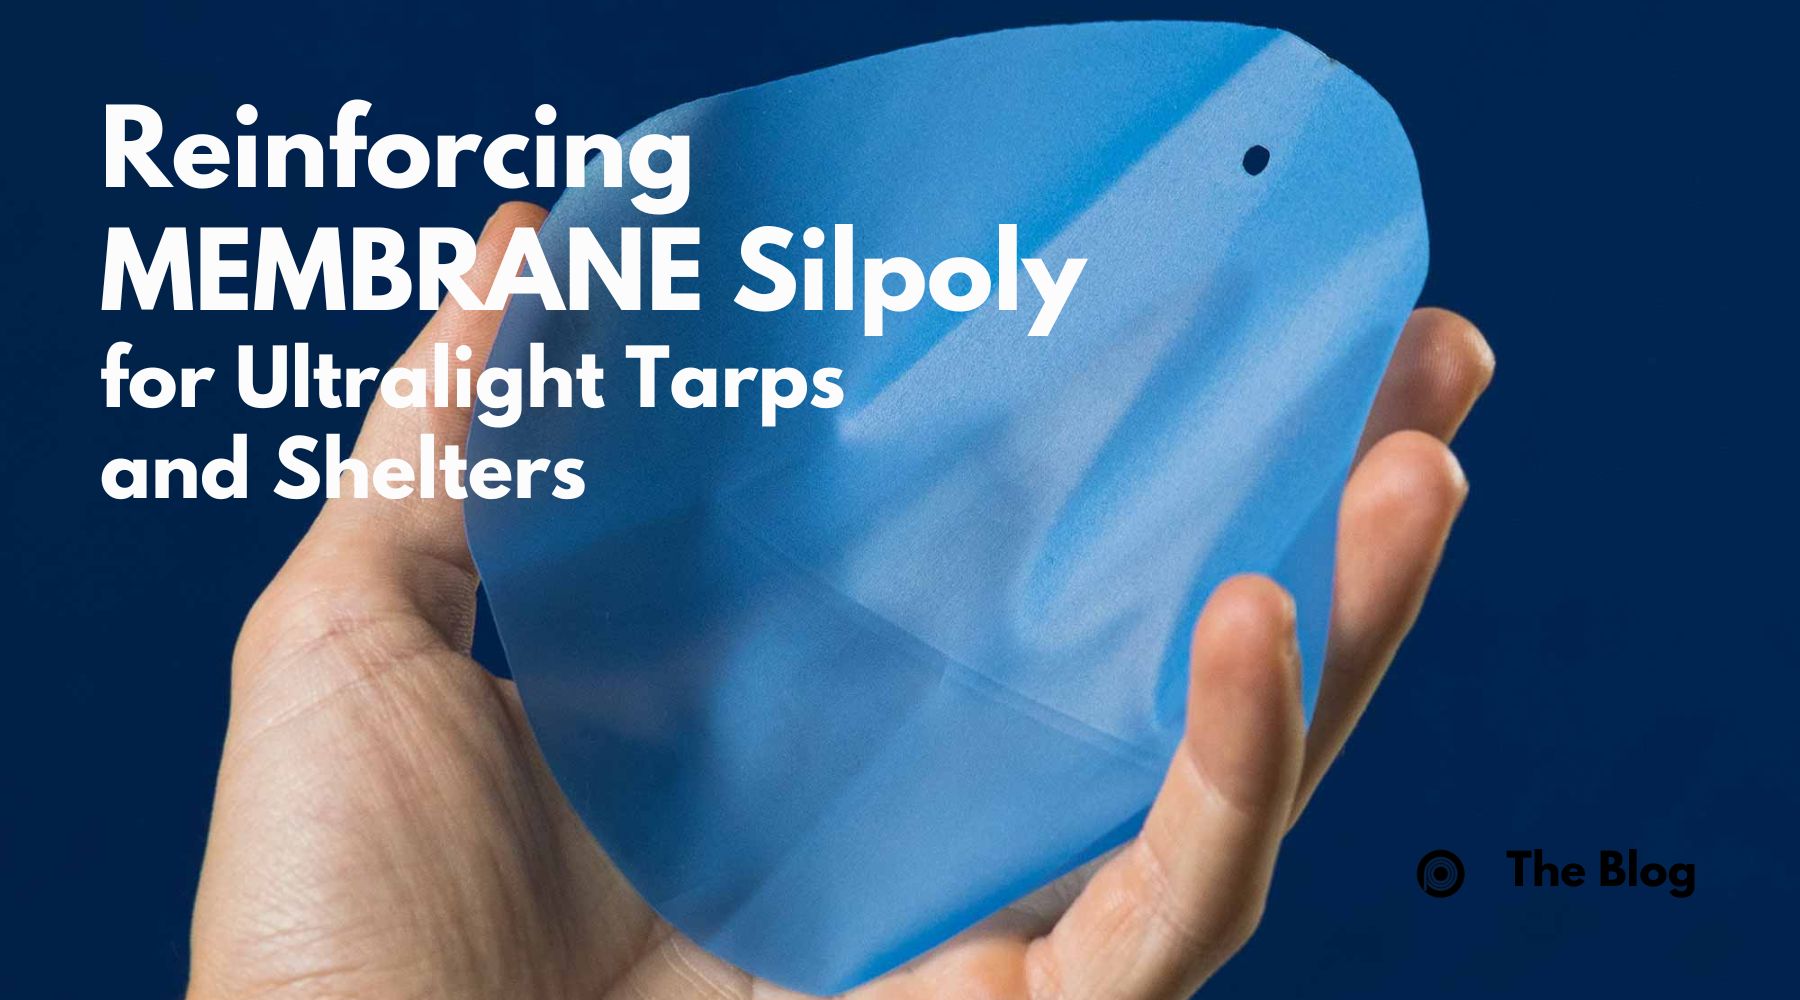 Reinforcing MEMBRANE Silpoly for Ultralight Tarps and Shelters